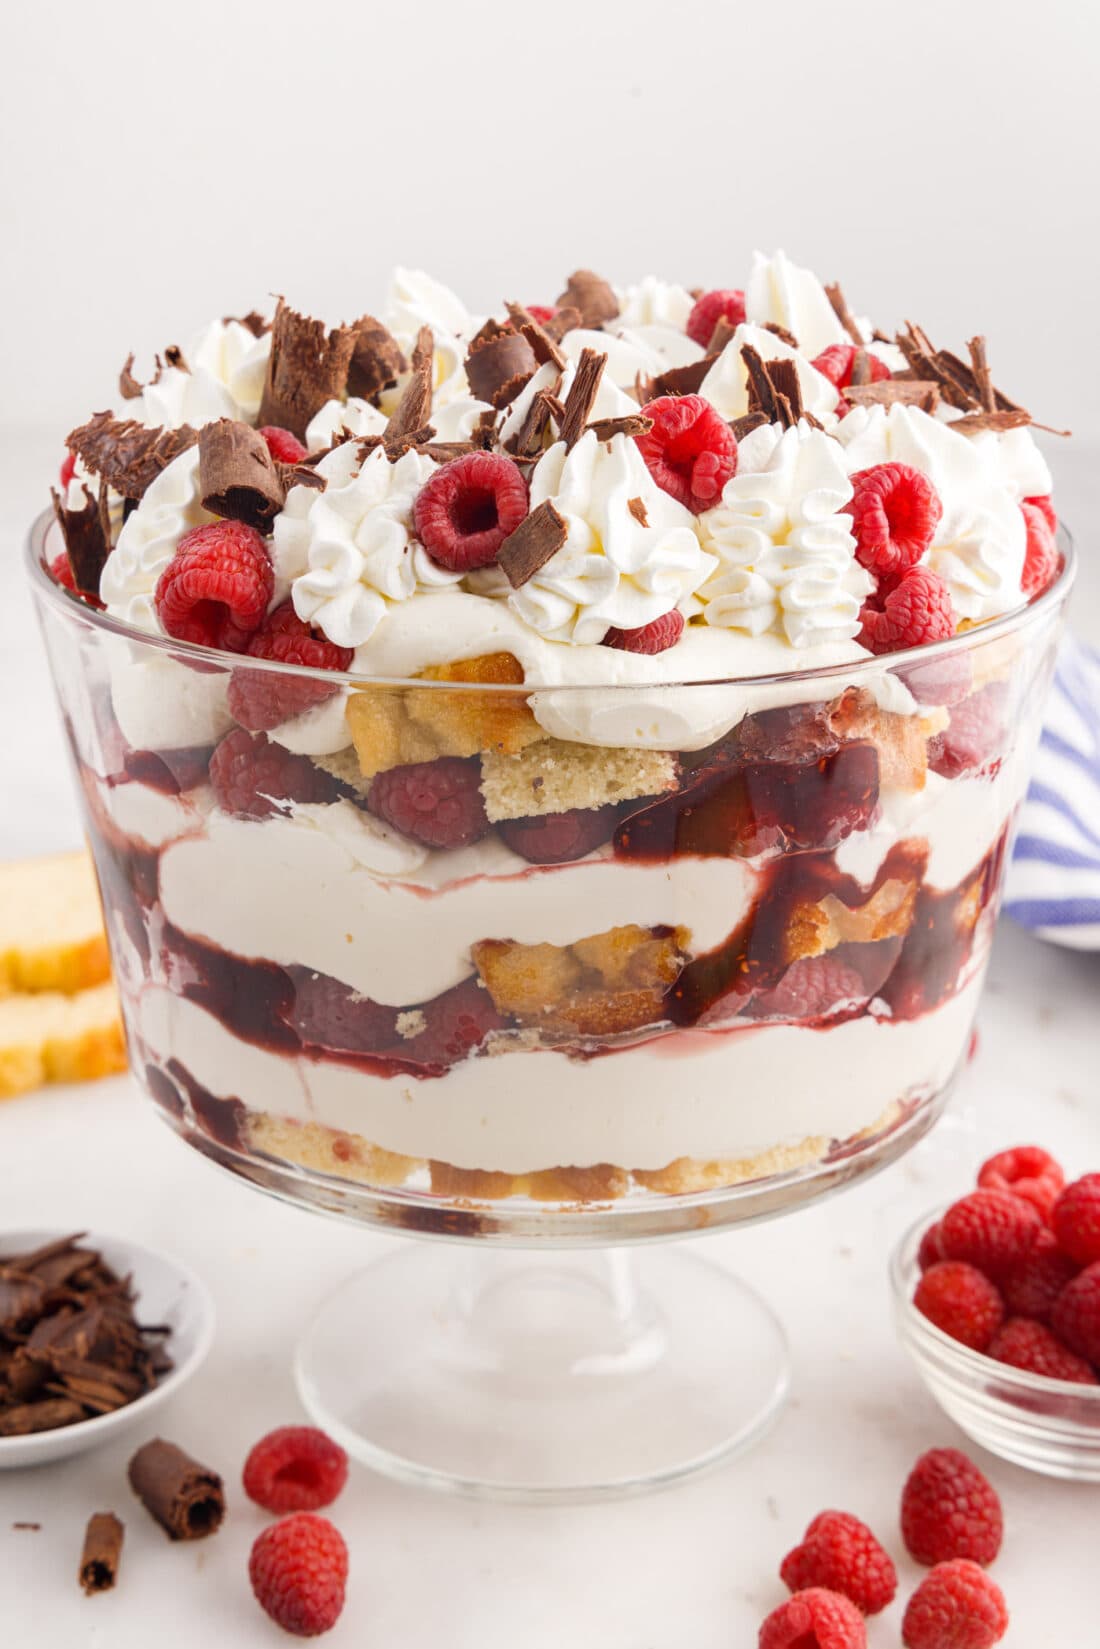 Photo of Raspberry Trifle with shaved chocolate and raspberries on the side